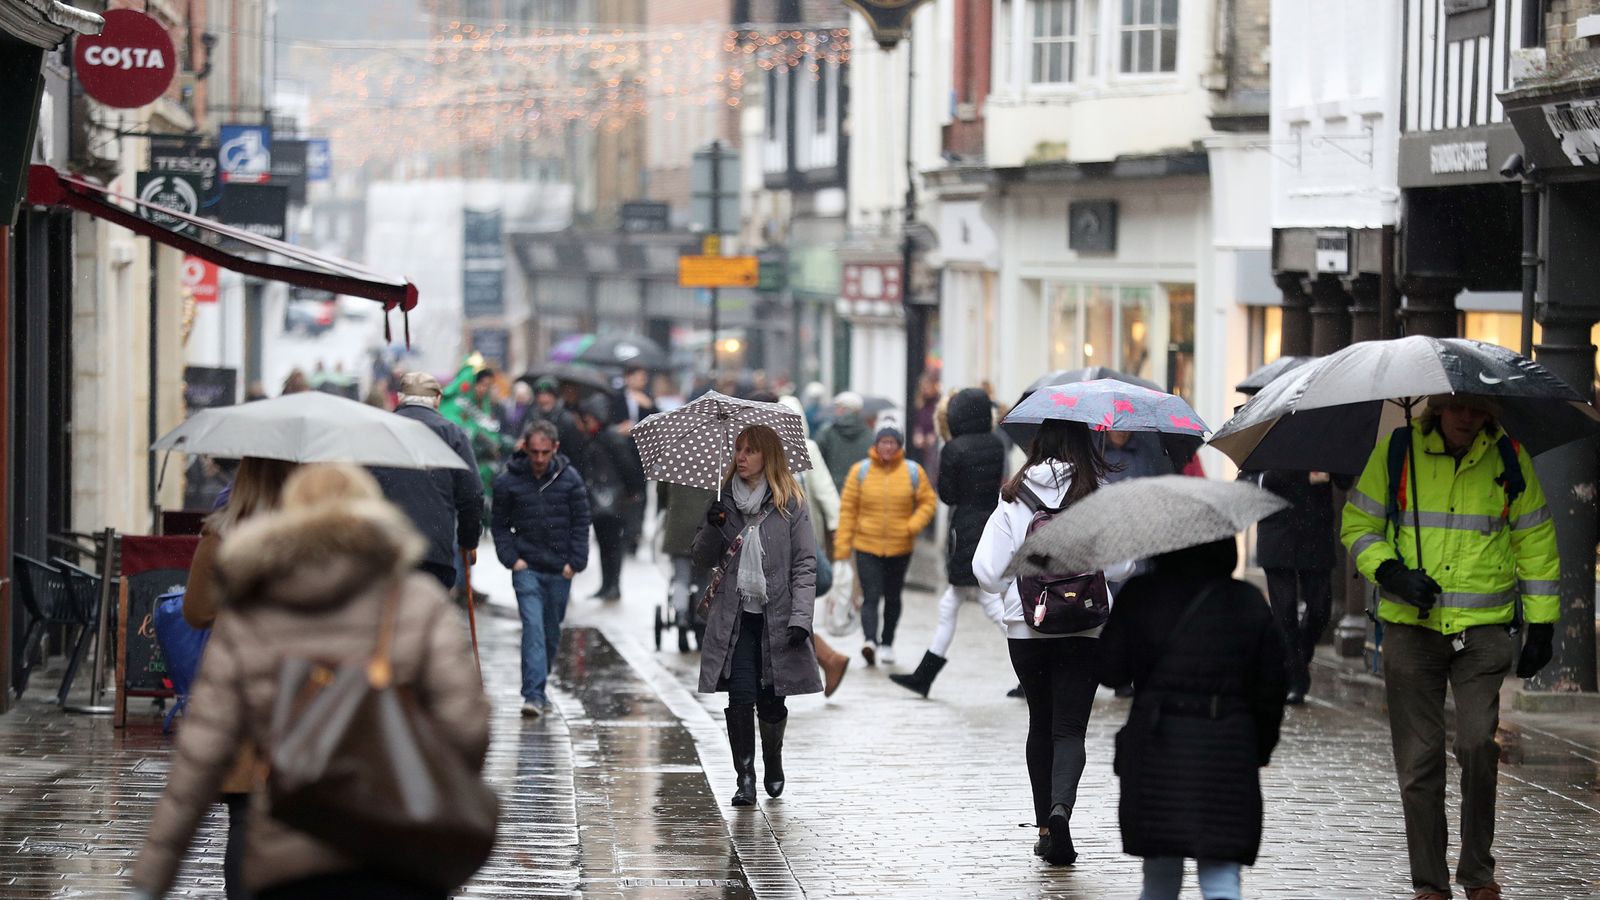 Retail sales 'at lockdown level' as poor weather and cost of living pressures weigh